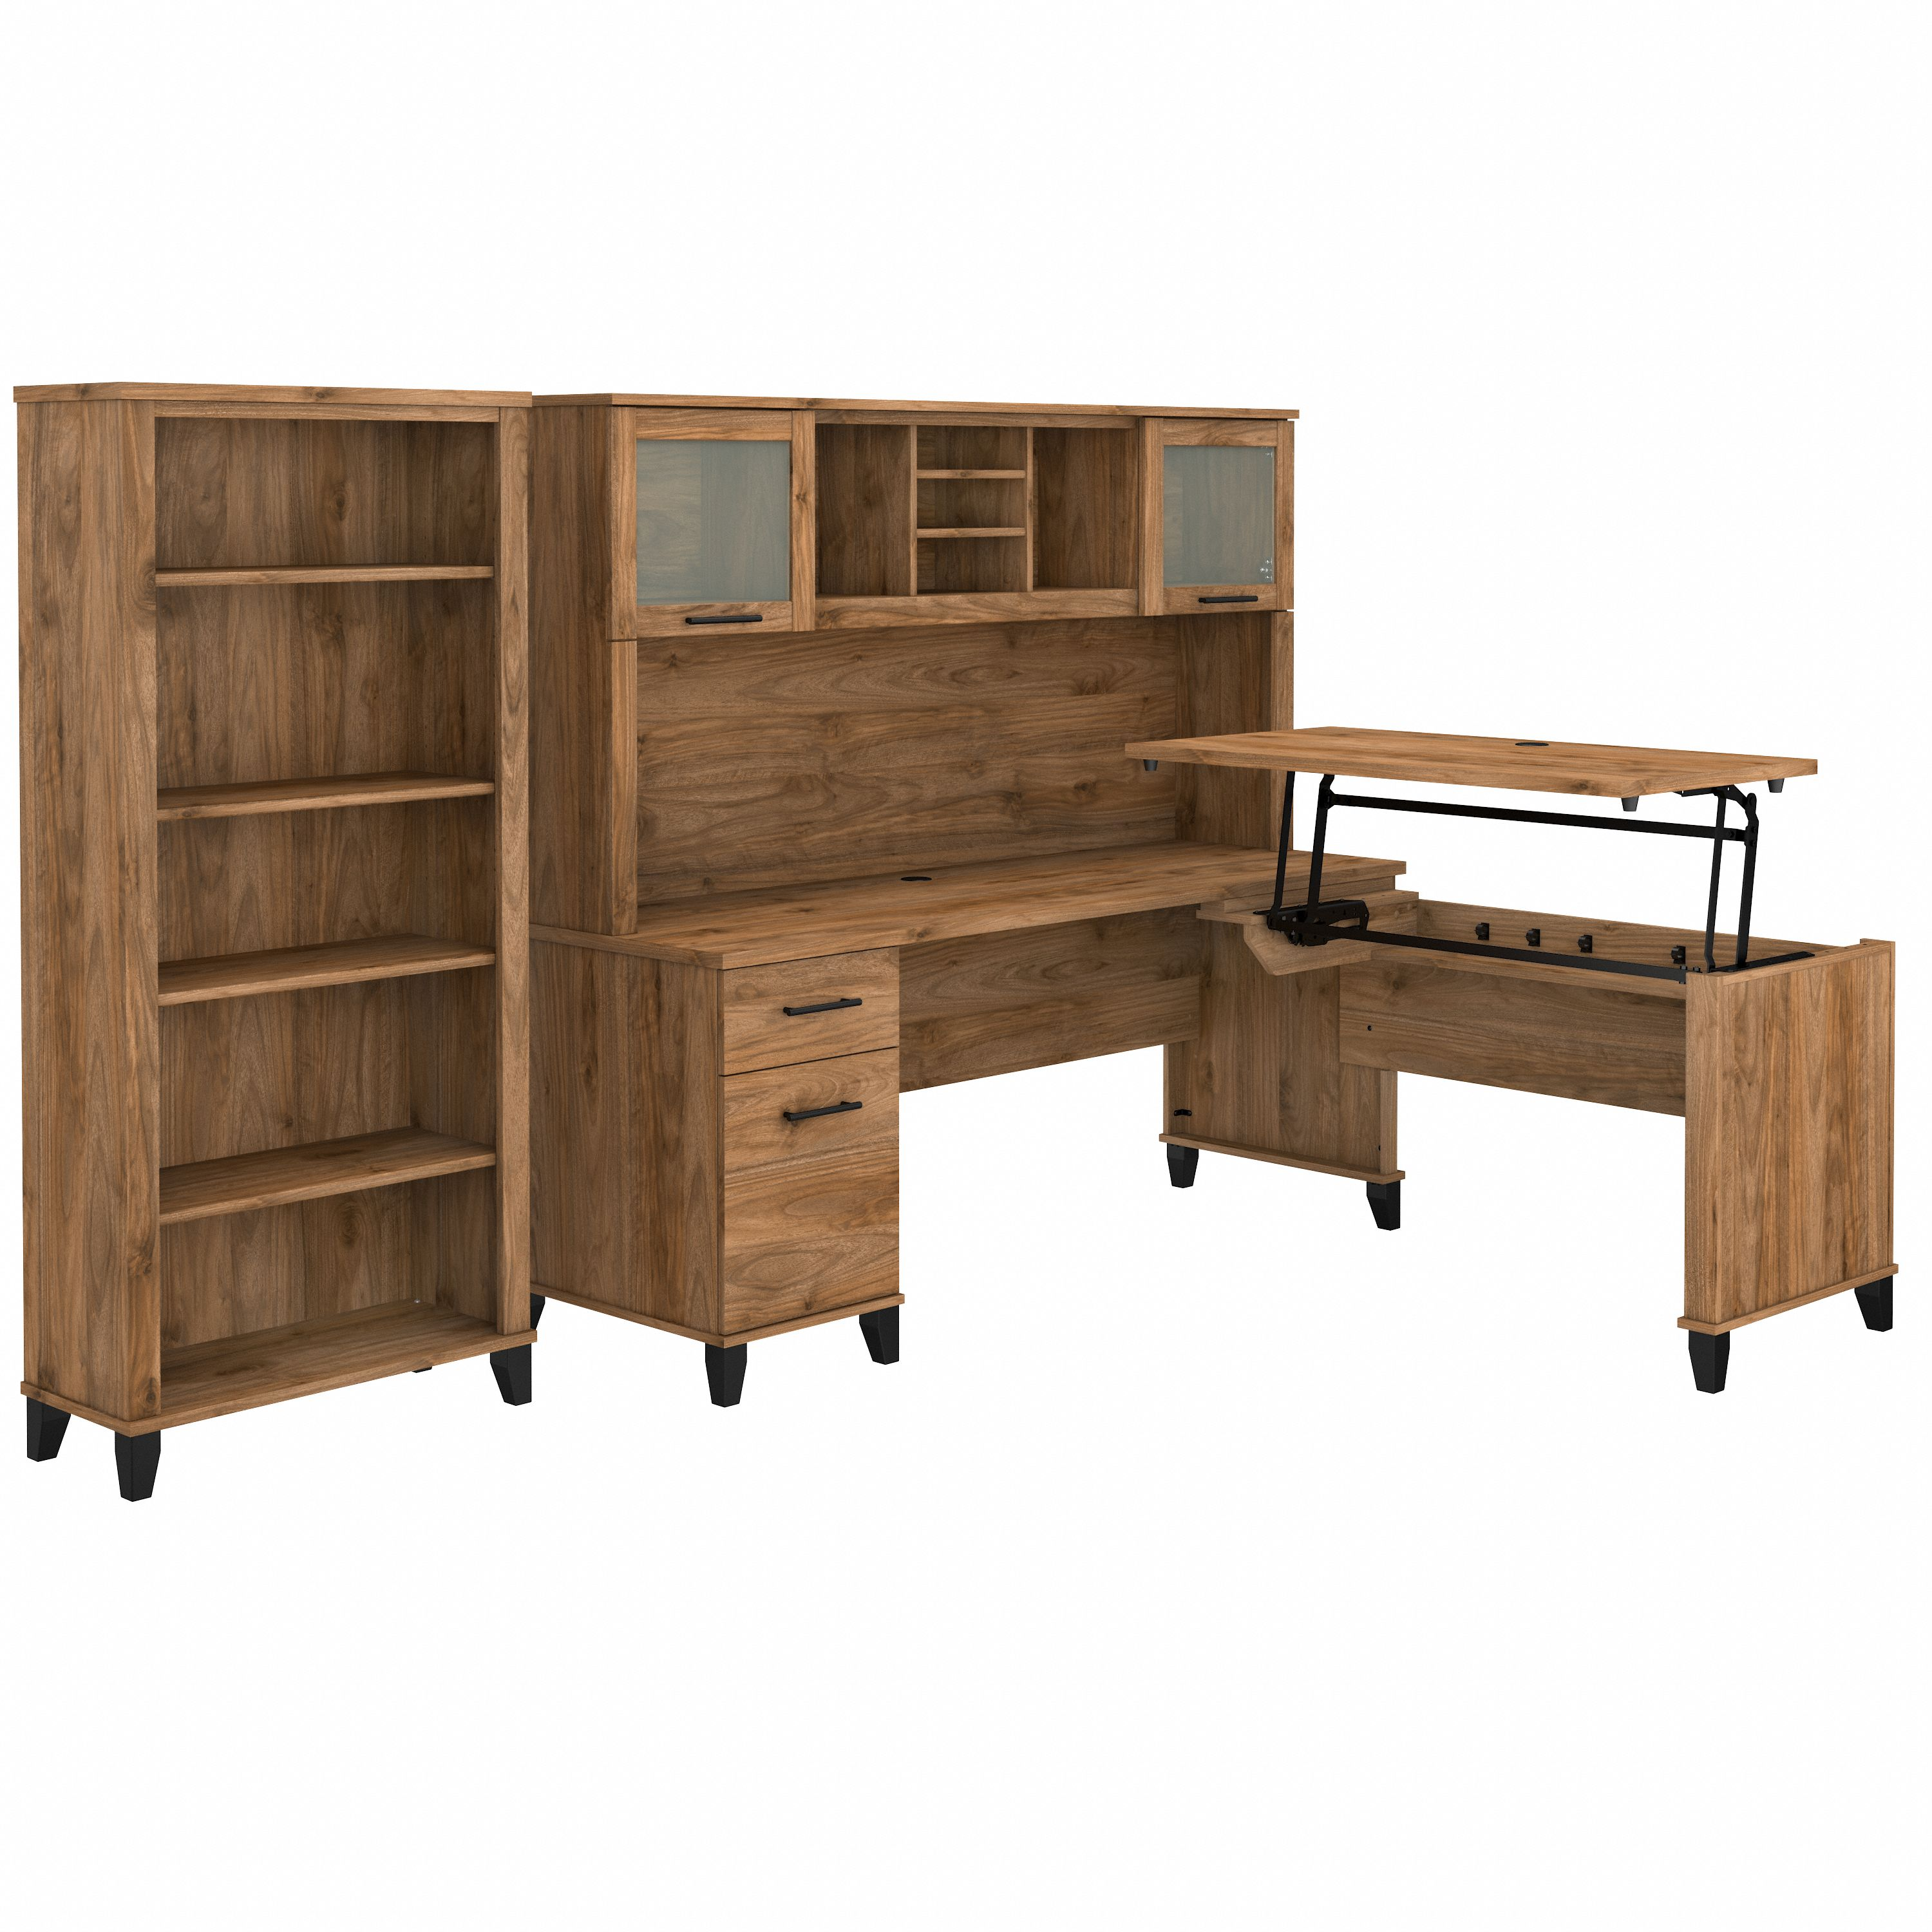 Shop Bush Furniture Somerset 72W 3 Position Sit to Stand L Shaped Desk with Hutch and Bookcase 02 SET017FW #color_fresh walnut